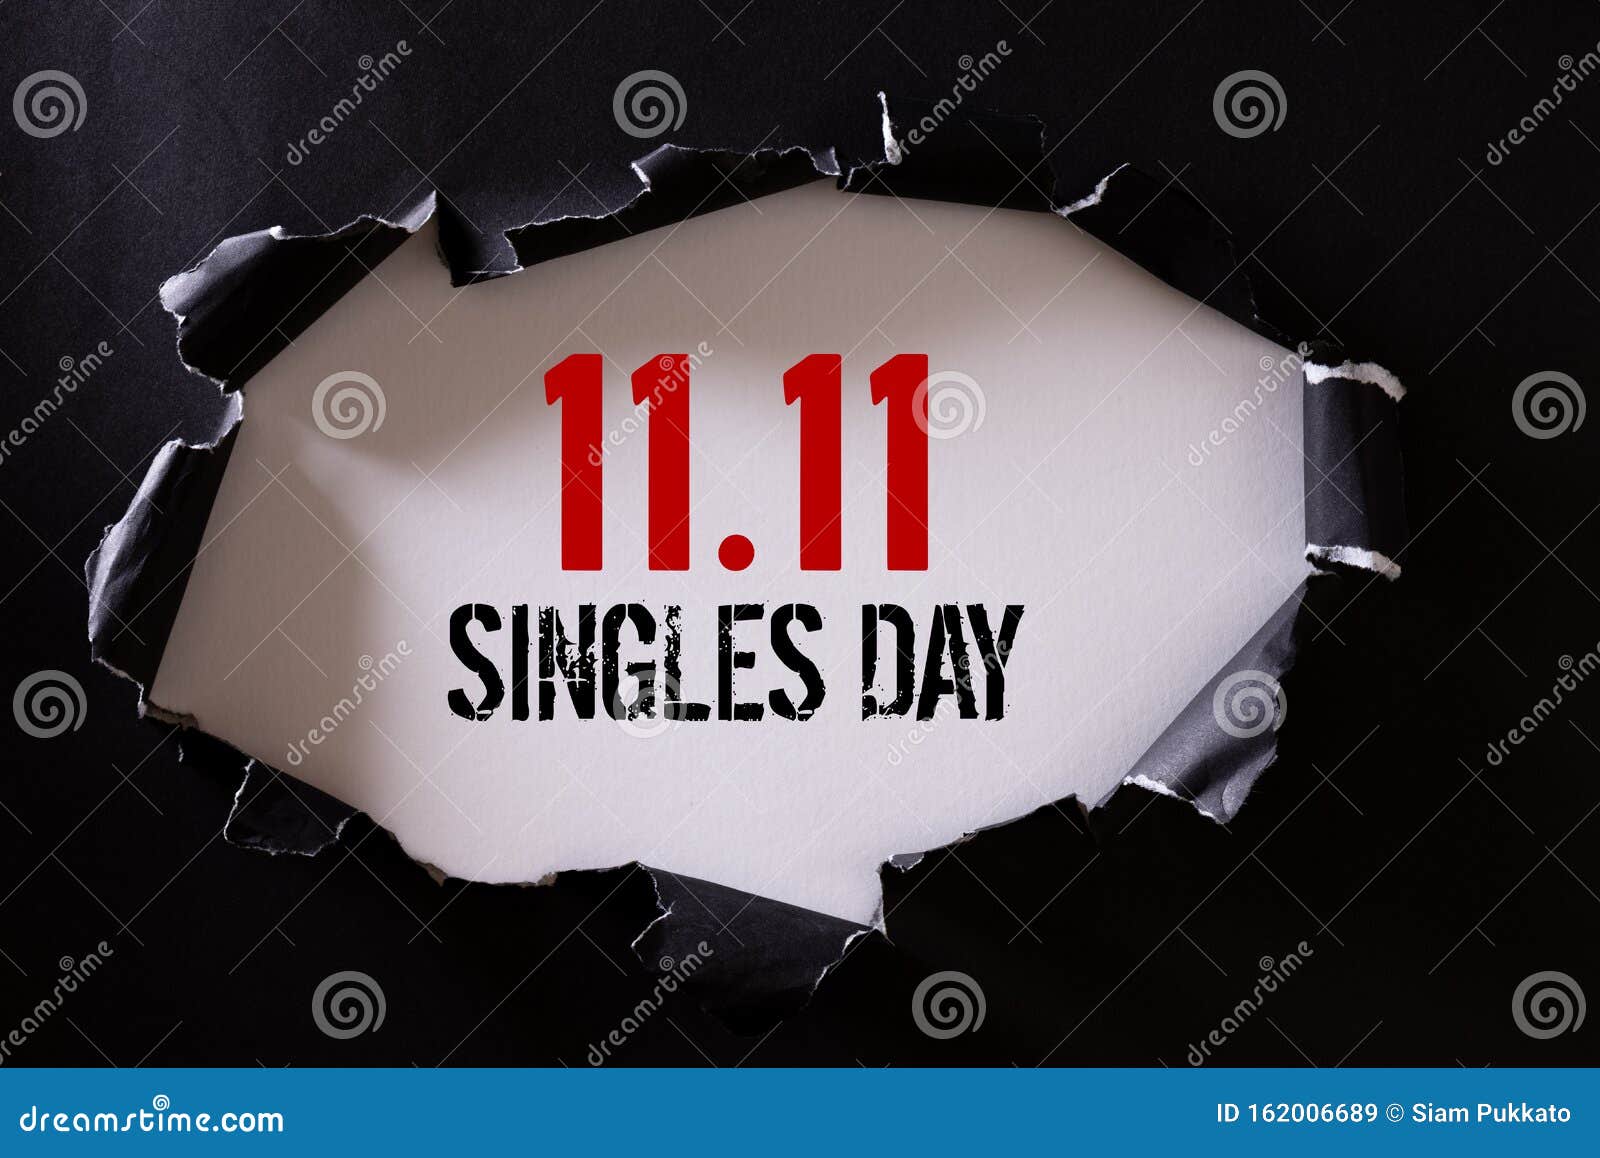 online shopping of china, 11.11 singles day sale concept. top view of black torn paper and the text 11.11 singles day sale on a